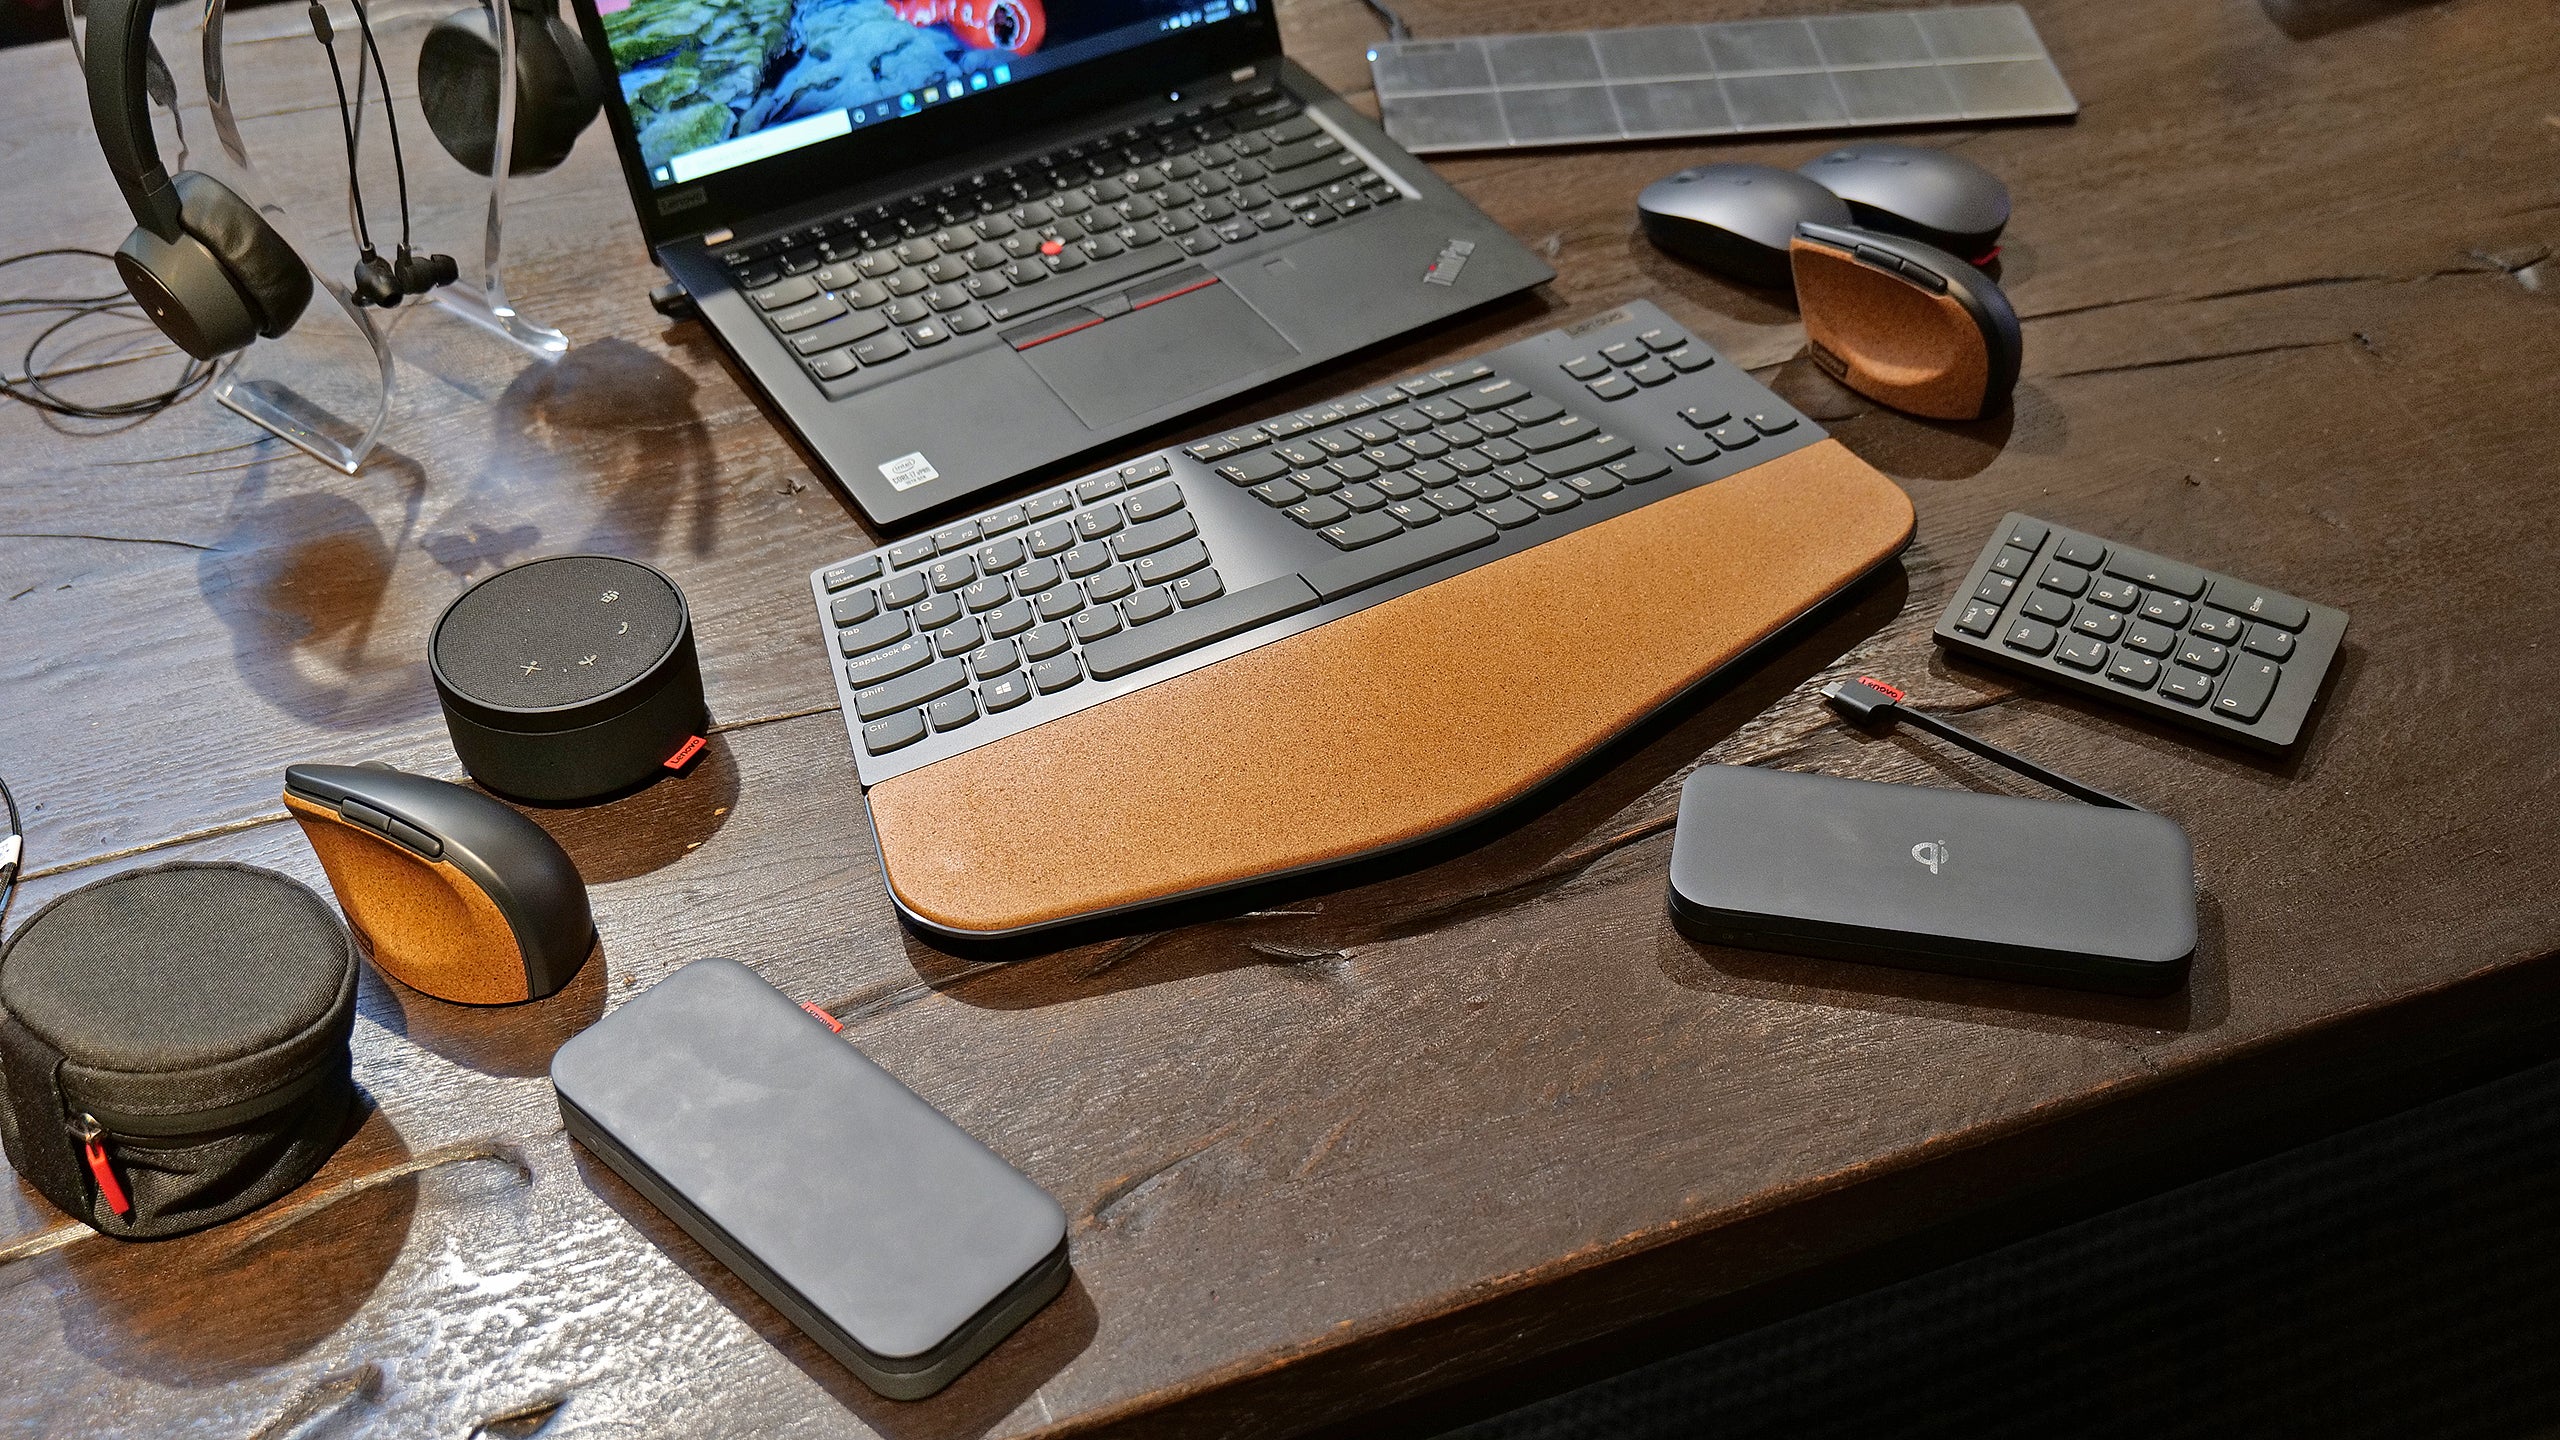 Lenovo's new line of Lenovo Go accessories includes everything from wireless keyboards and mice to power banks, portable speakers, headsets, and more.  (Photo: Sam Rutherford)